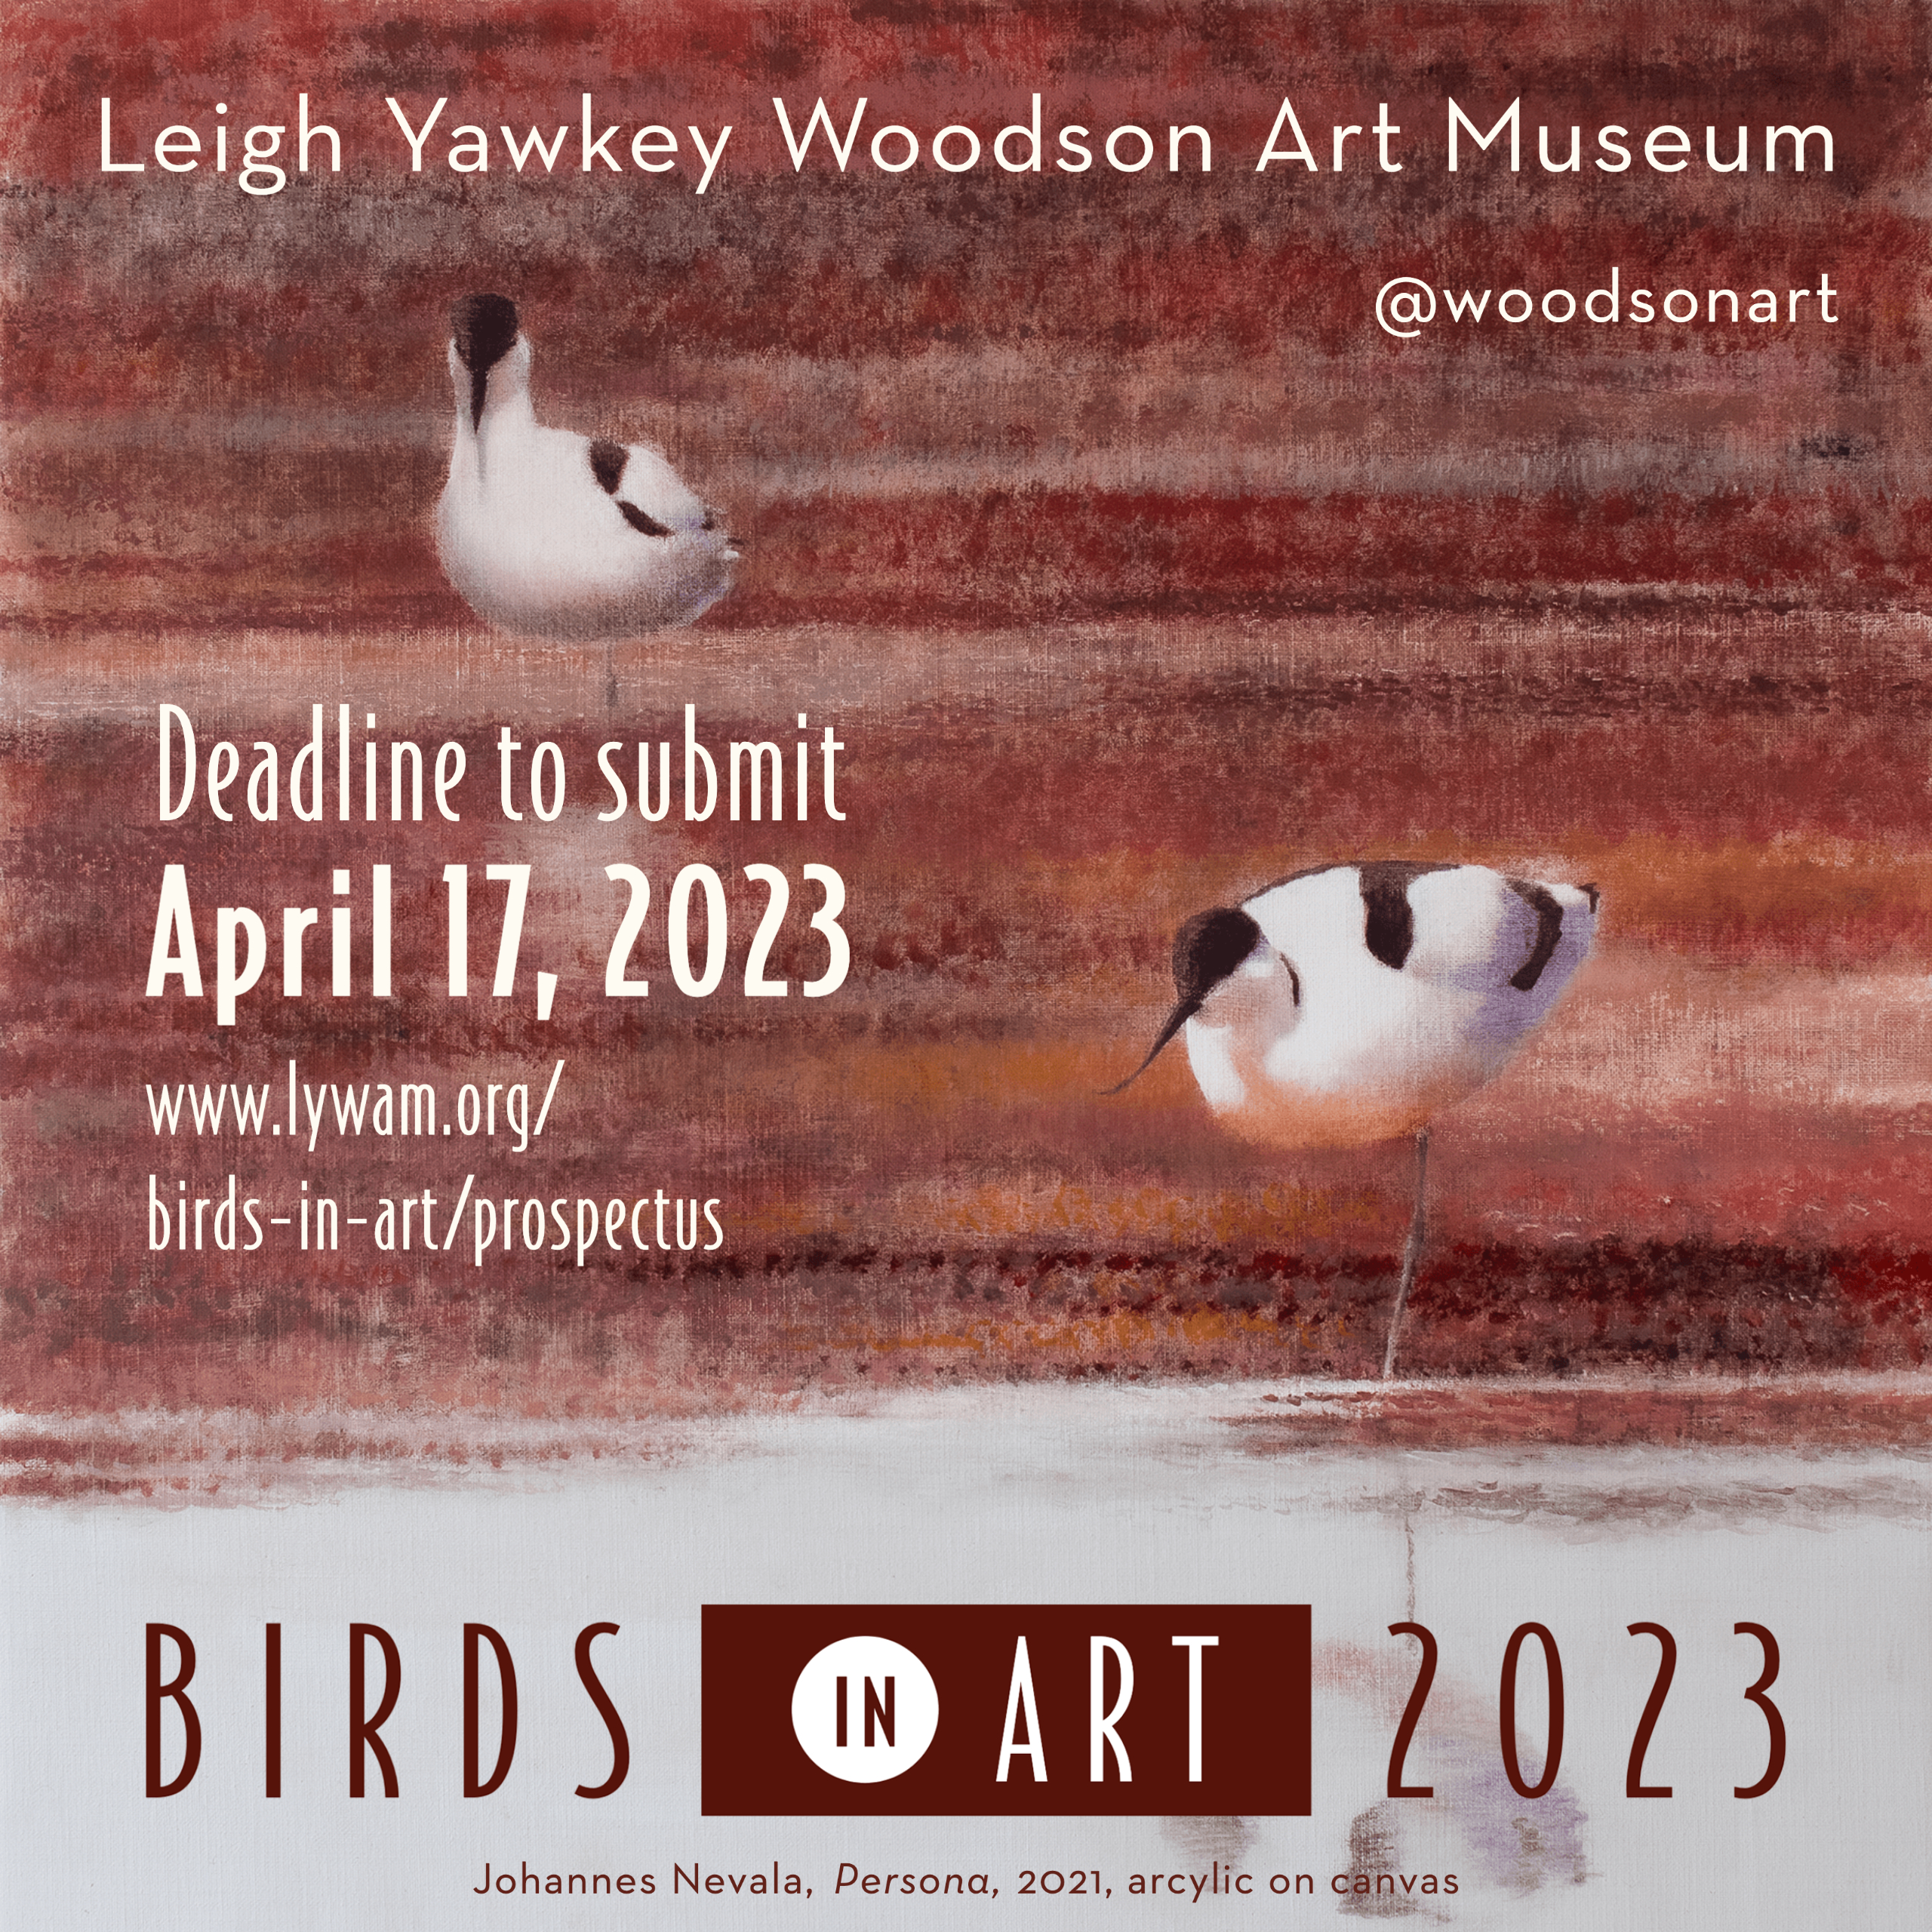 leigh yawkey woodosn art museum deadline to submbit april 17 2023 birds in art 2023 image of painting of two bird in water